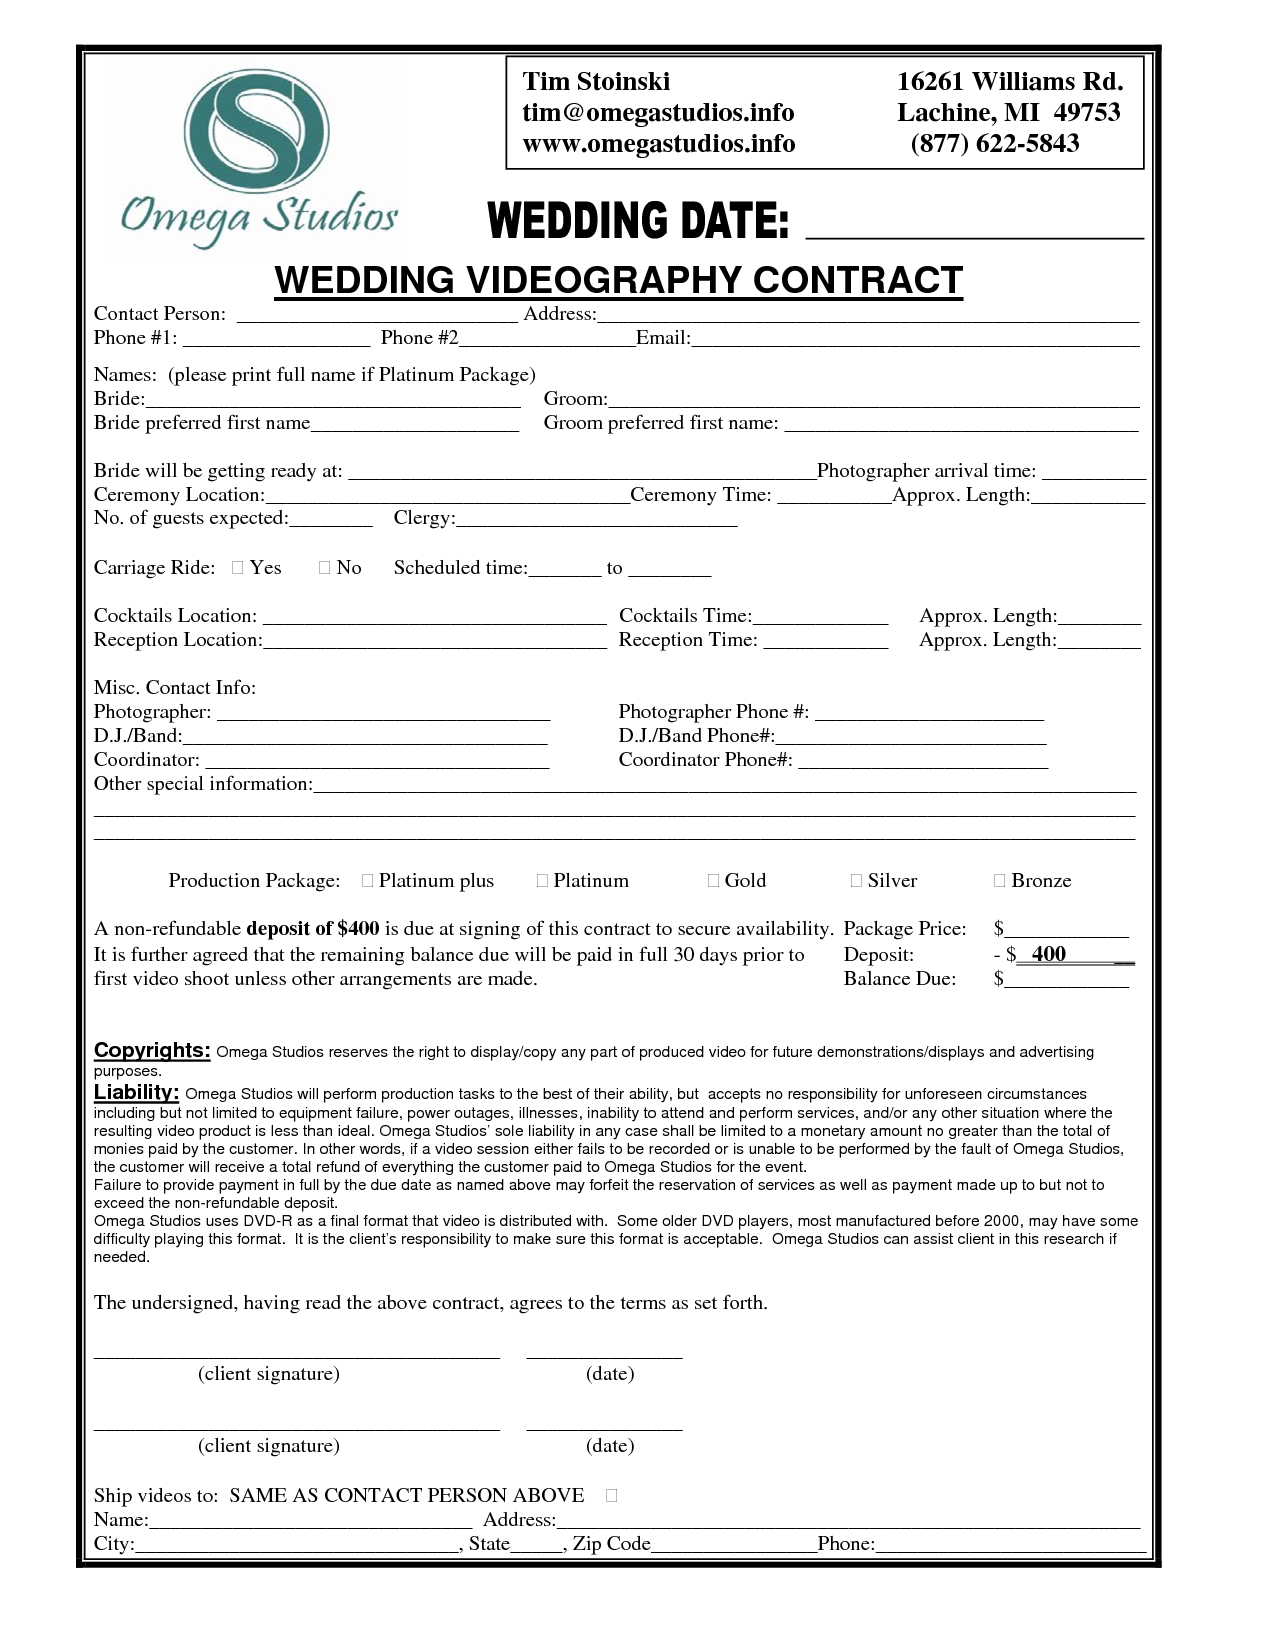 Wedding Videography Contract Template Free Printable Documents